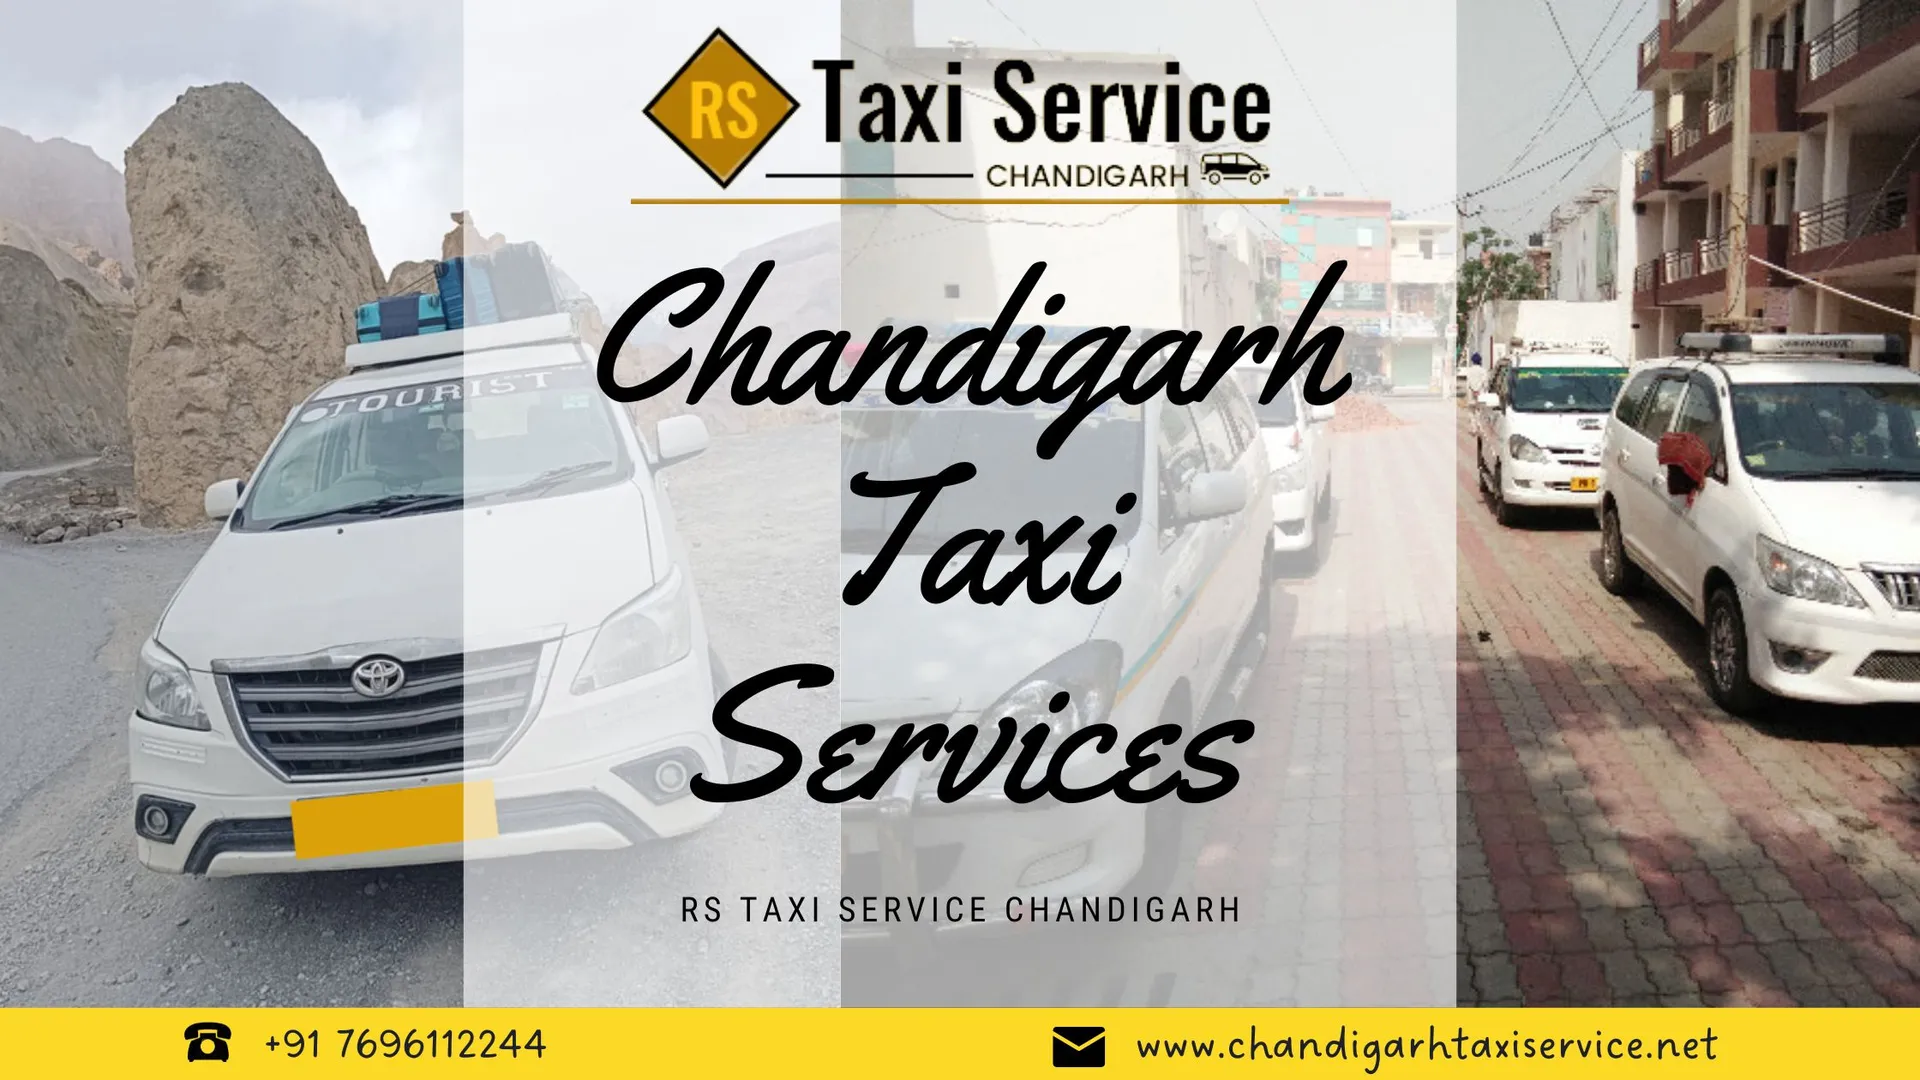 Discover unparalleled convenience and comfort with RS Taxi Service Chandigarh — your ultimate solution for Chandigarh taxi services.

From solo travelers to groups, we cater to all your transportation needs, providing a range of vehicles to choose from.

Your destination is our devotion. Contact us now. https://www.chandigarhtaxiservice.net/